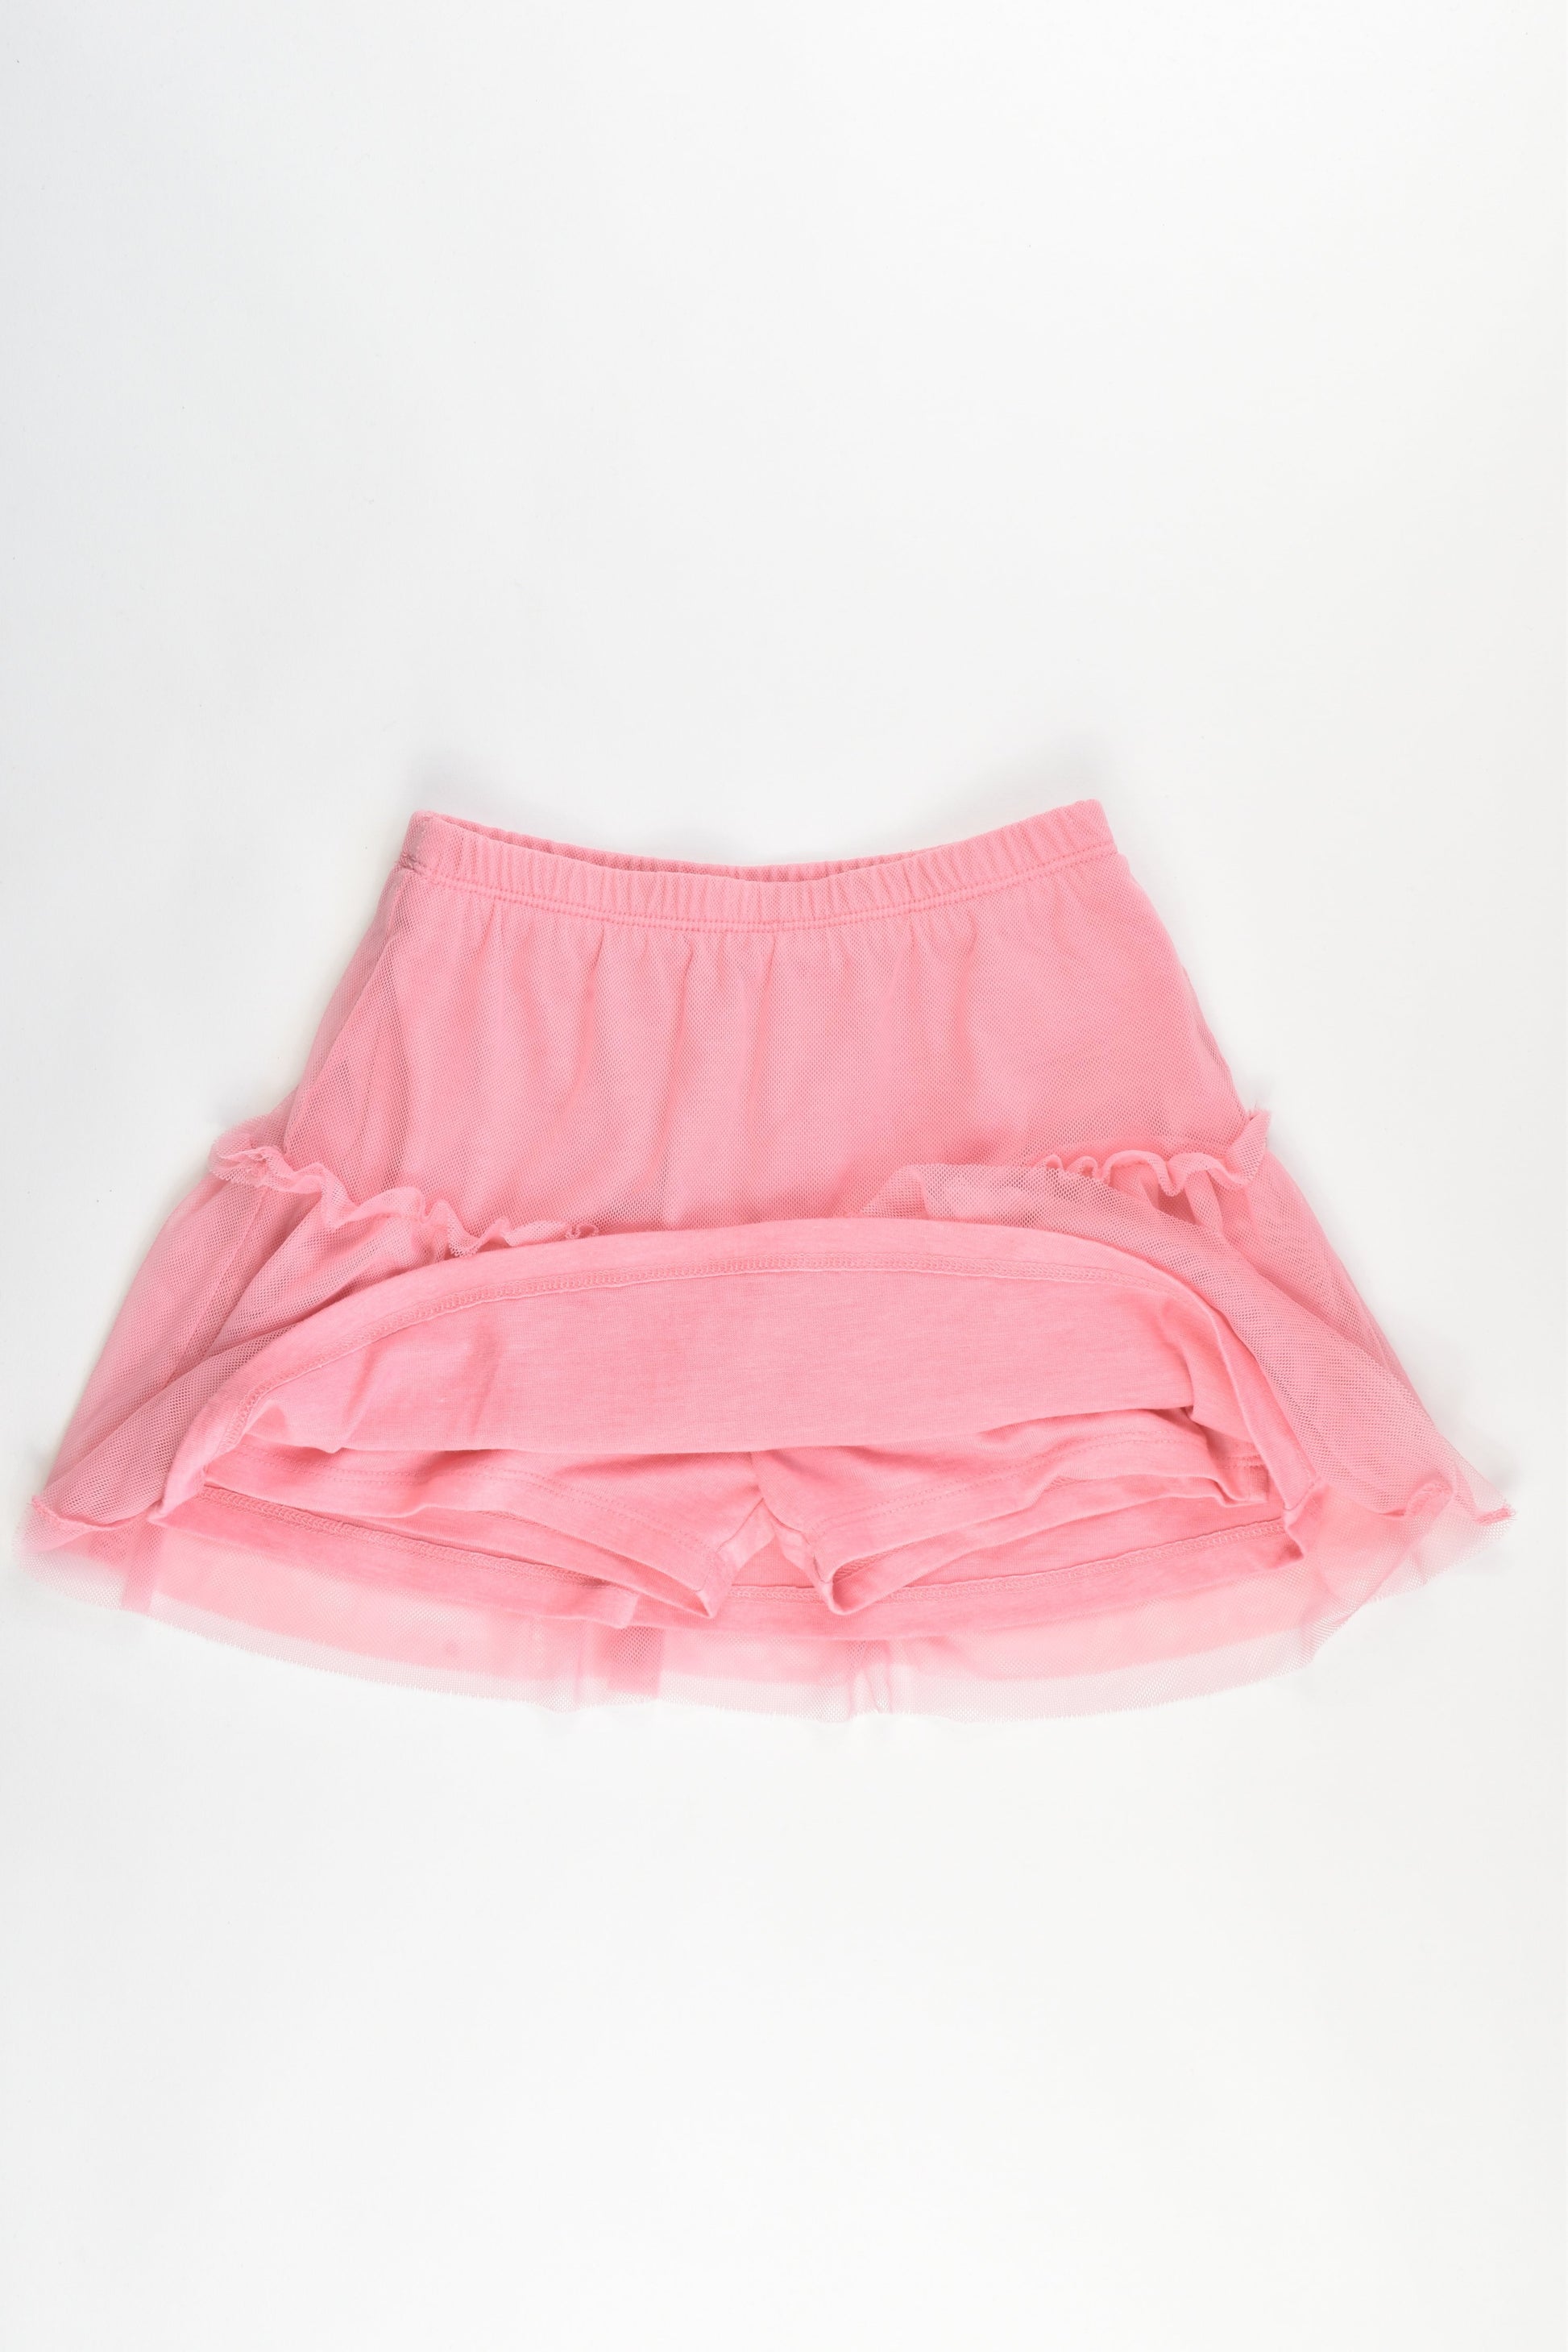 Jessica Simpson Size 5 Lined Skirt with Shorts Underneath